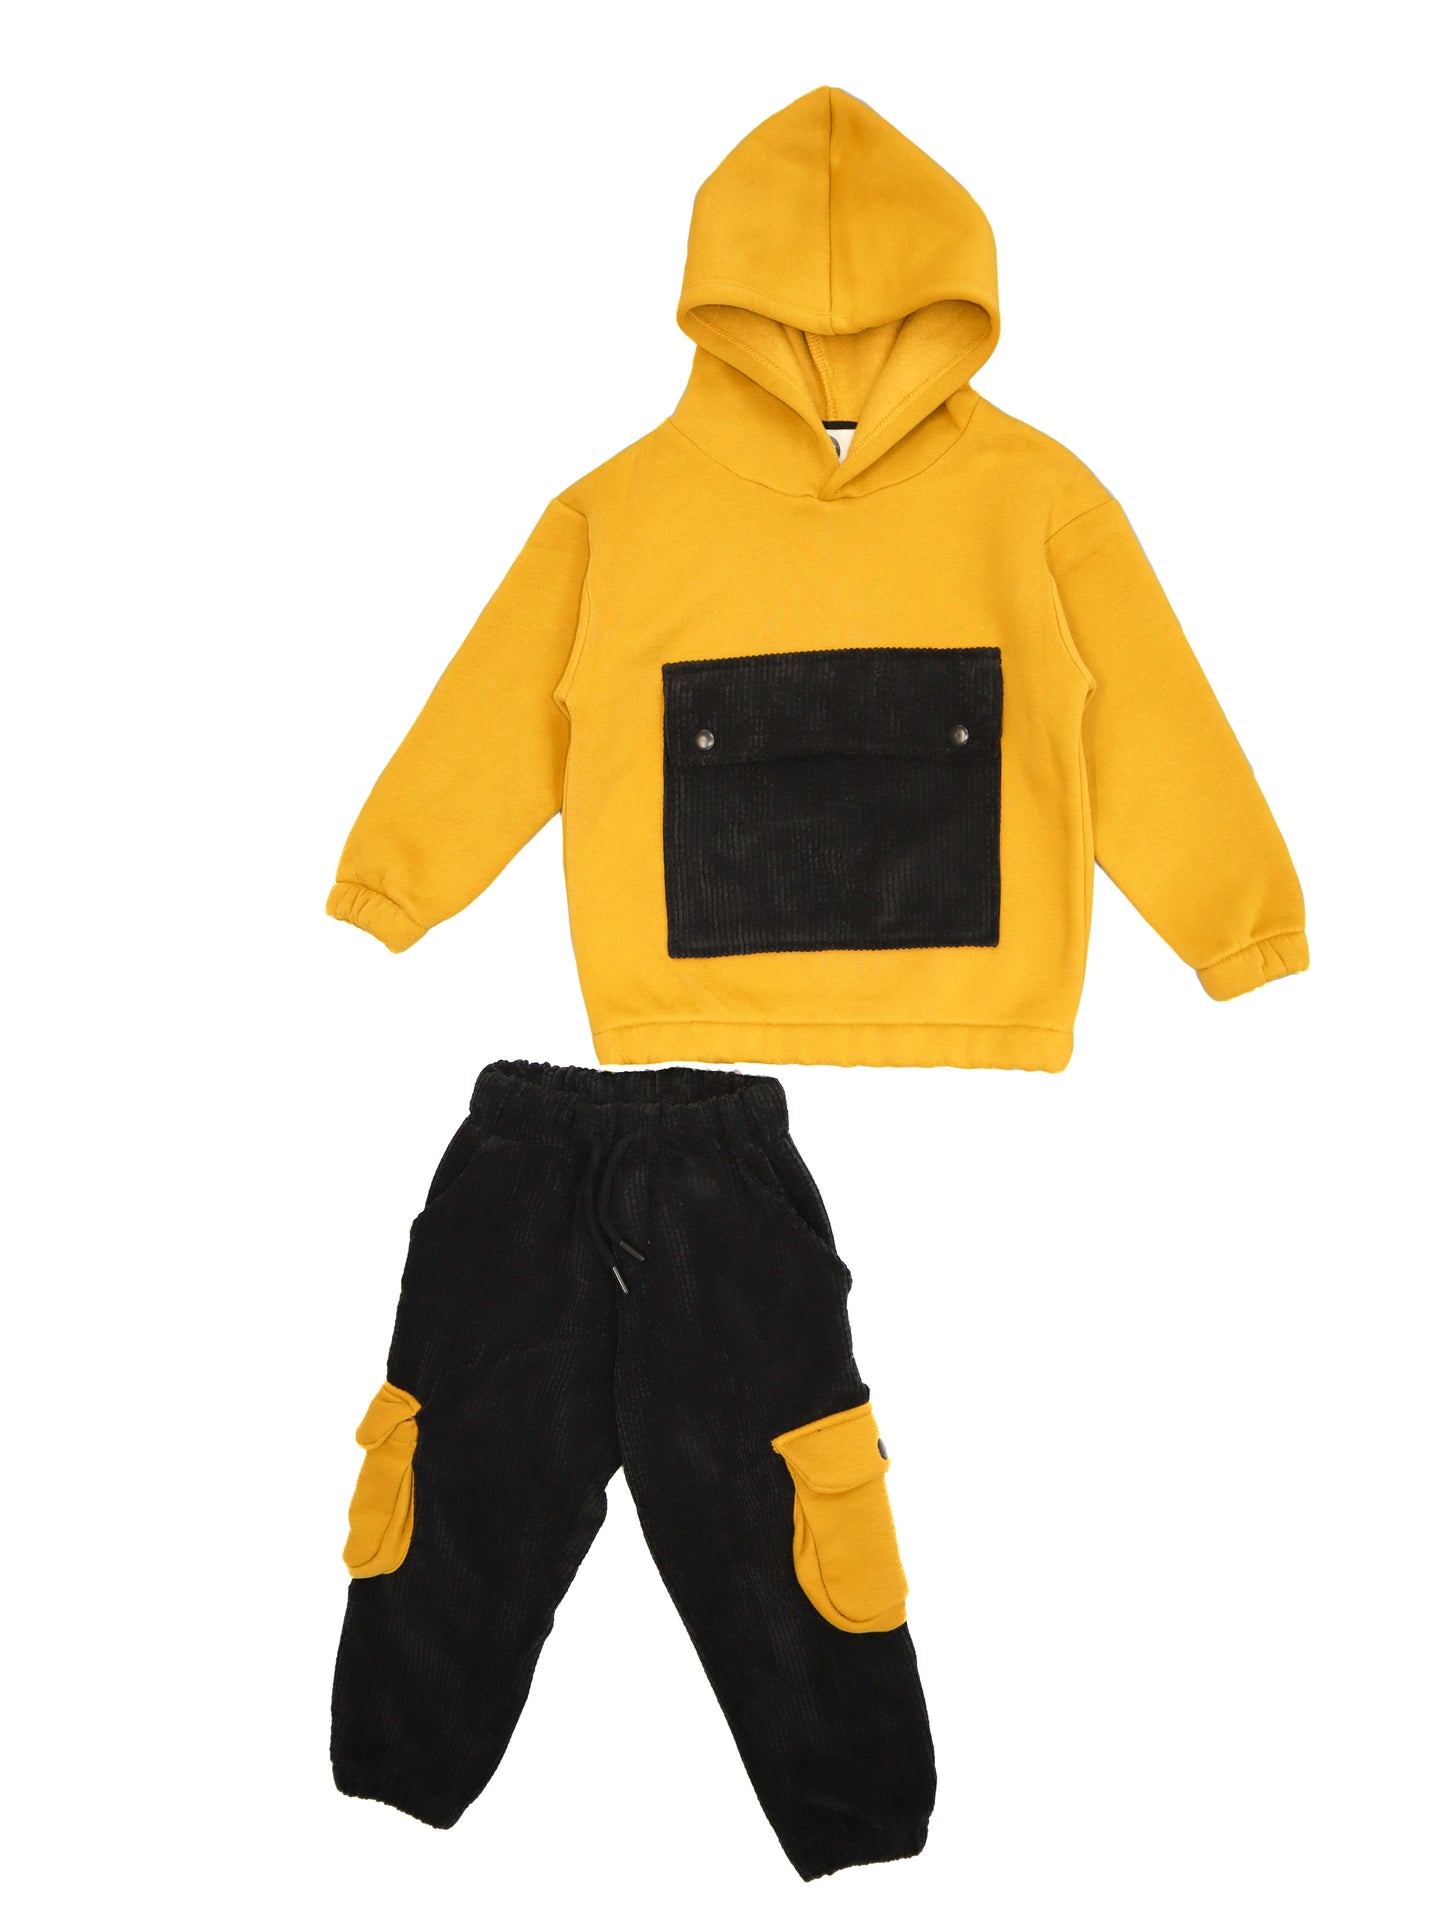 Unisex Winter 2-Piece Set with Cargo Pocket and Hood